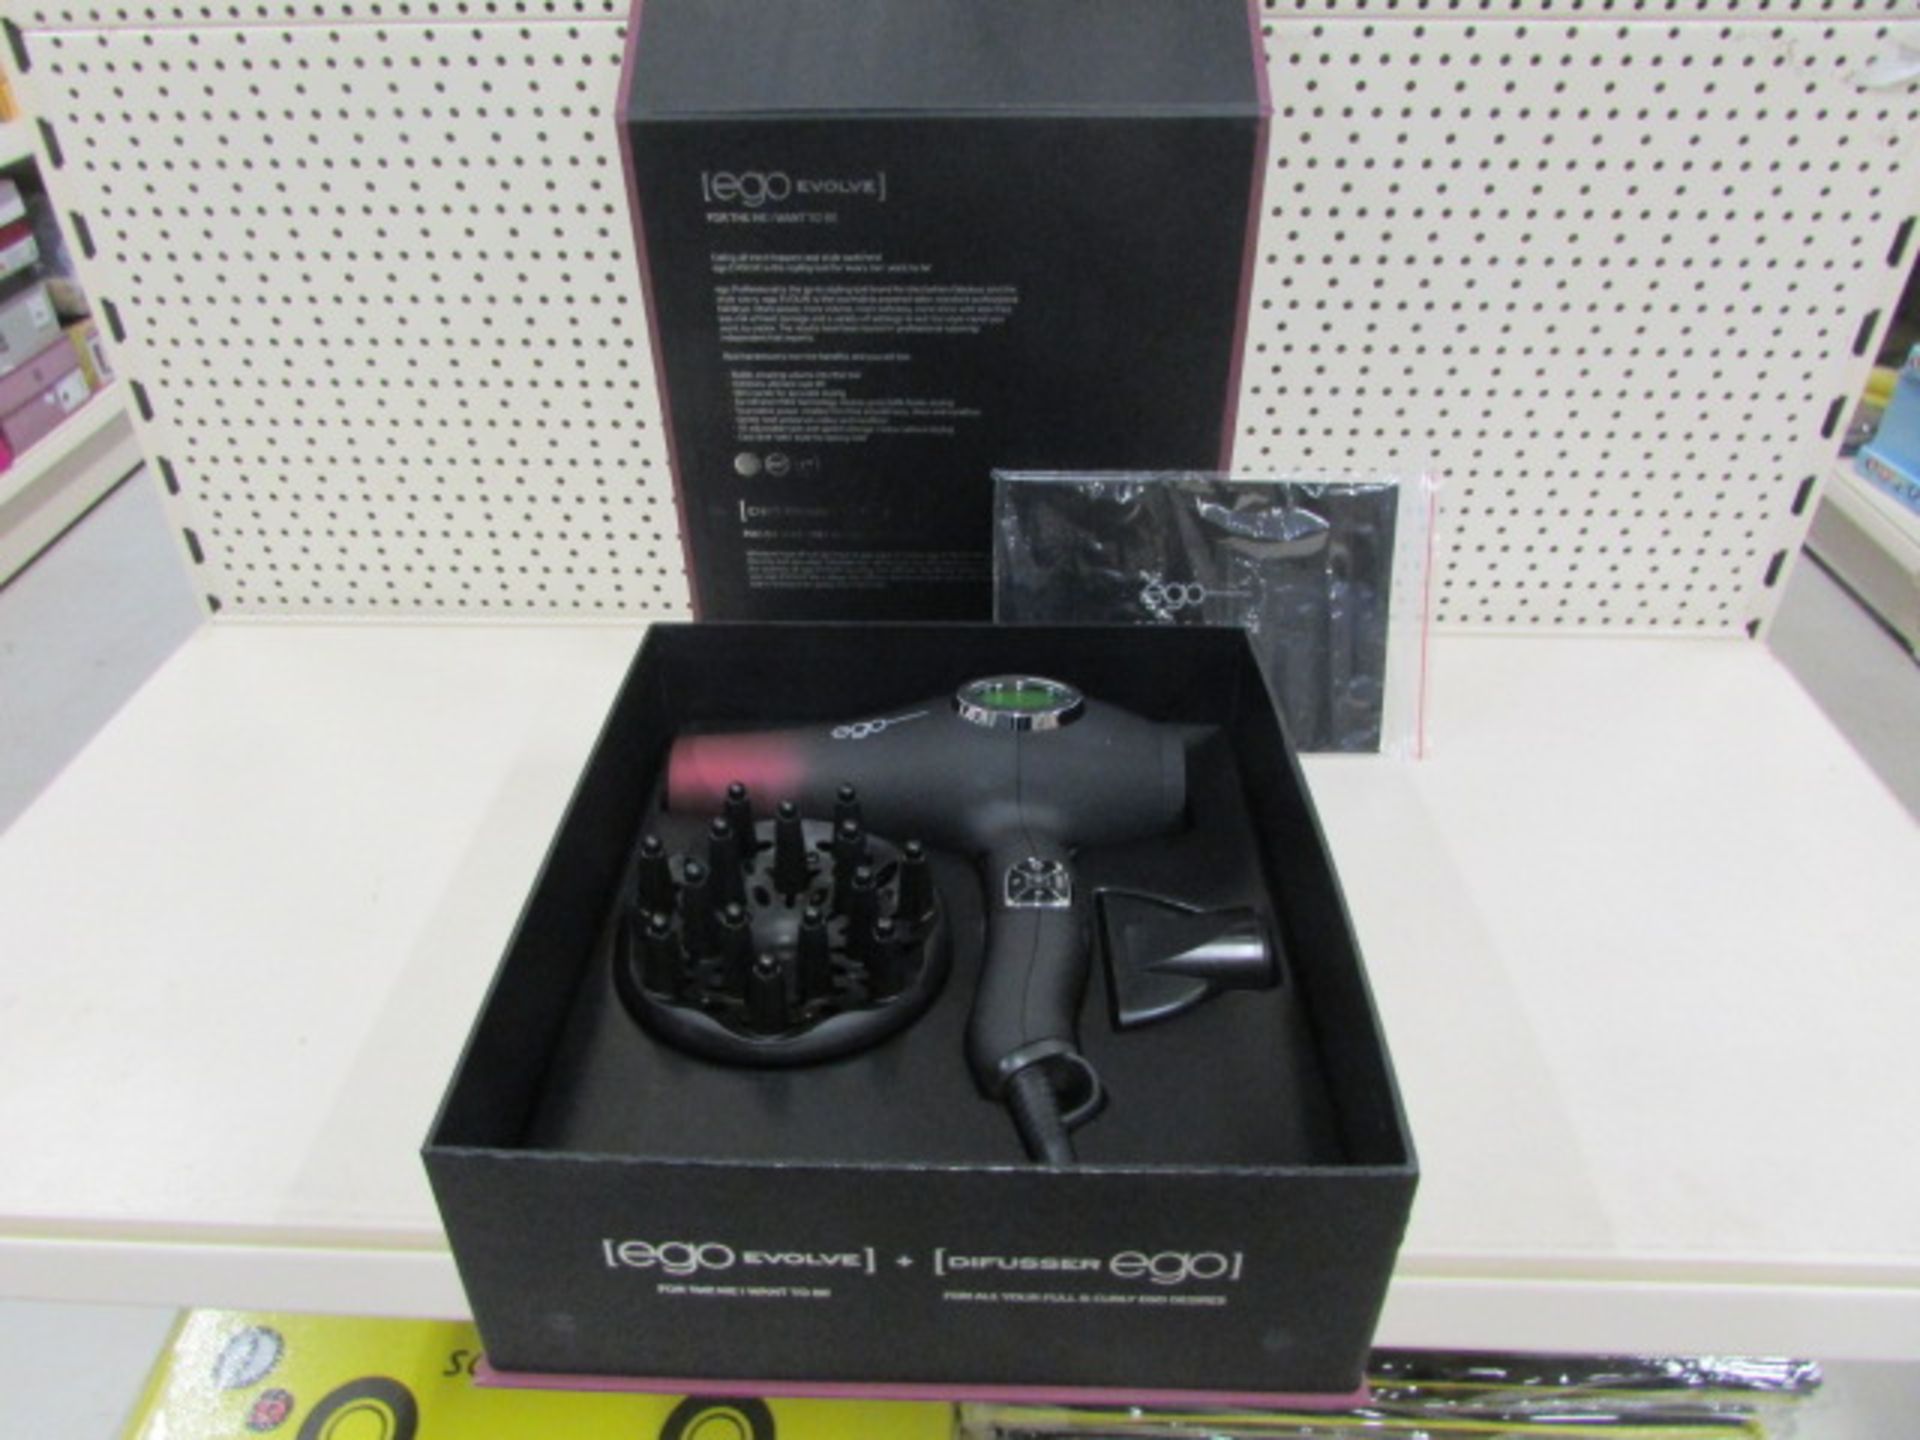 3 X Ego Professional Ego Evolve Hairdryer + Difusser [Brand New] - Image 5 of 6